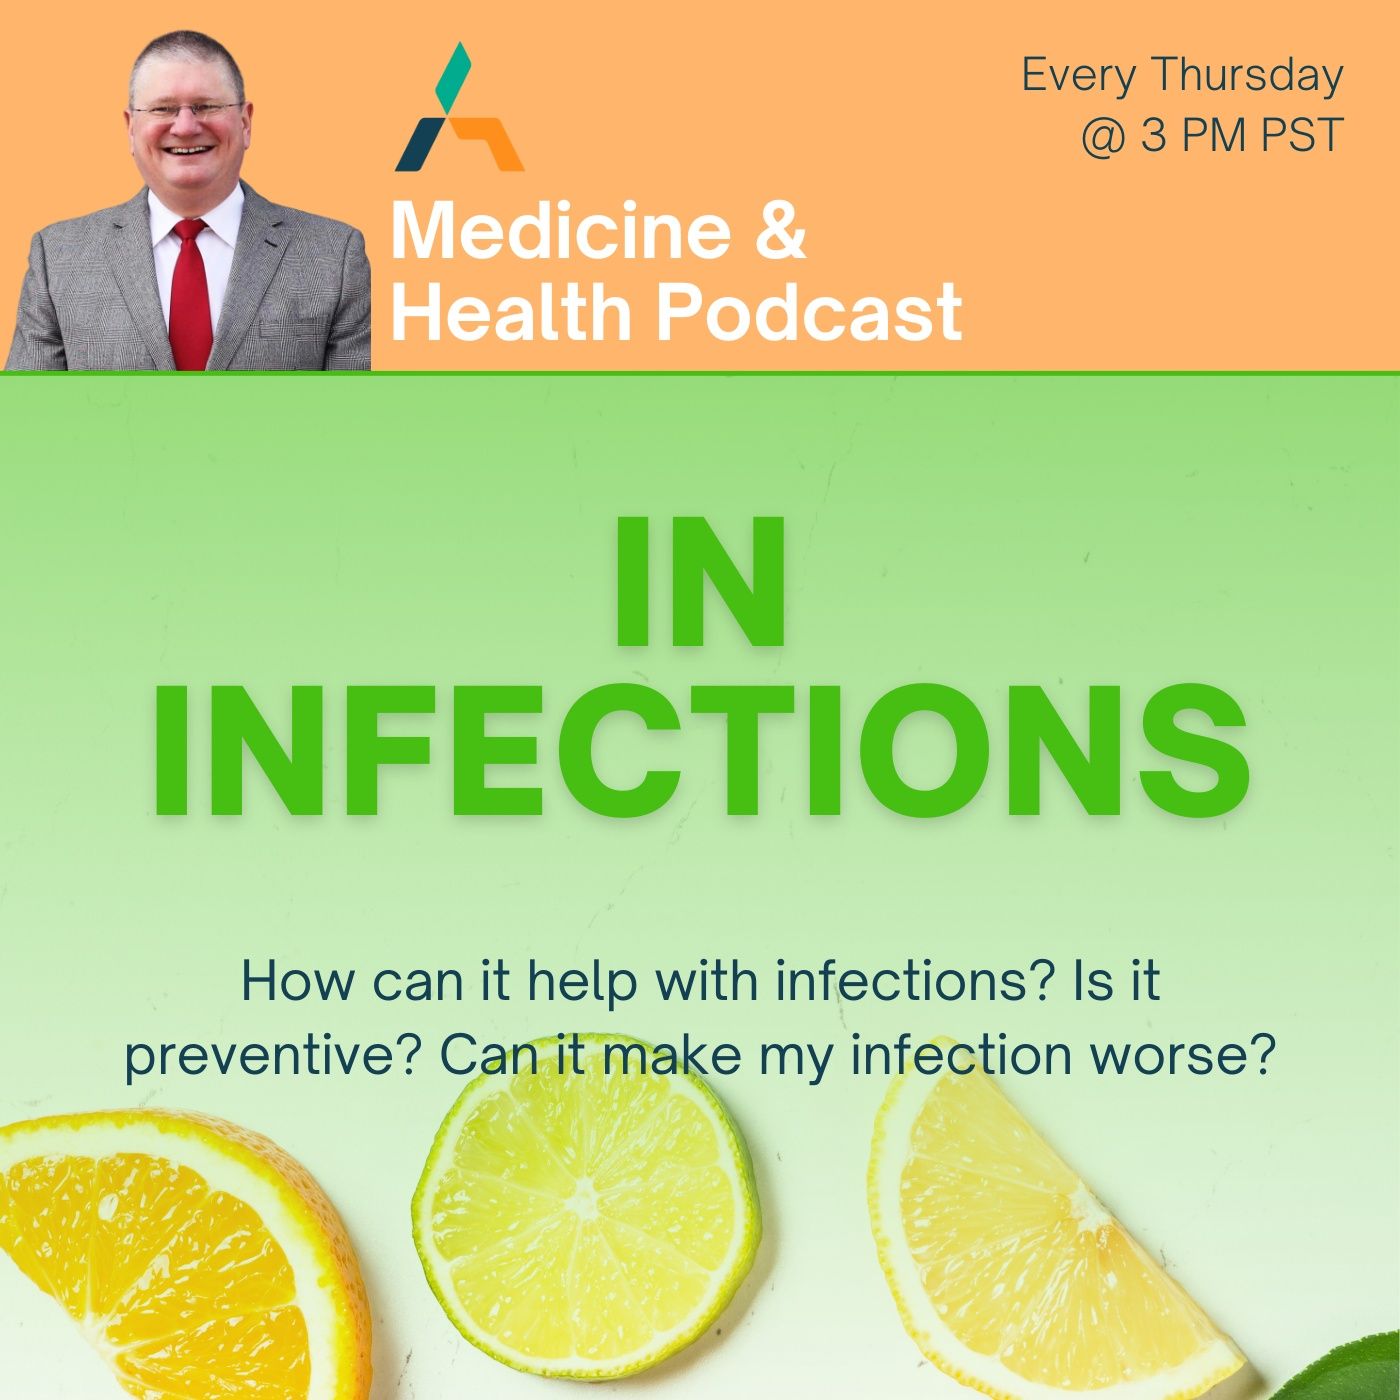 VITAMIN C IN INFECTIONS